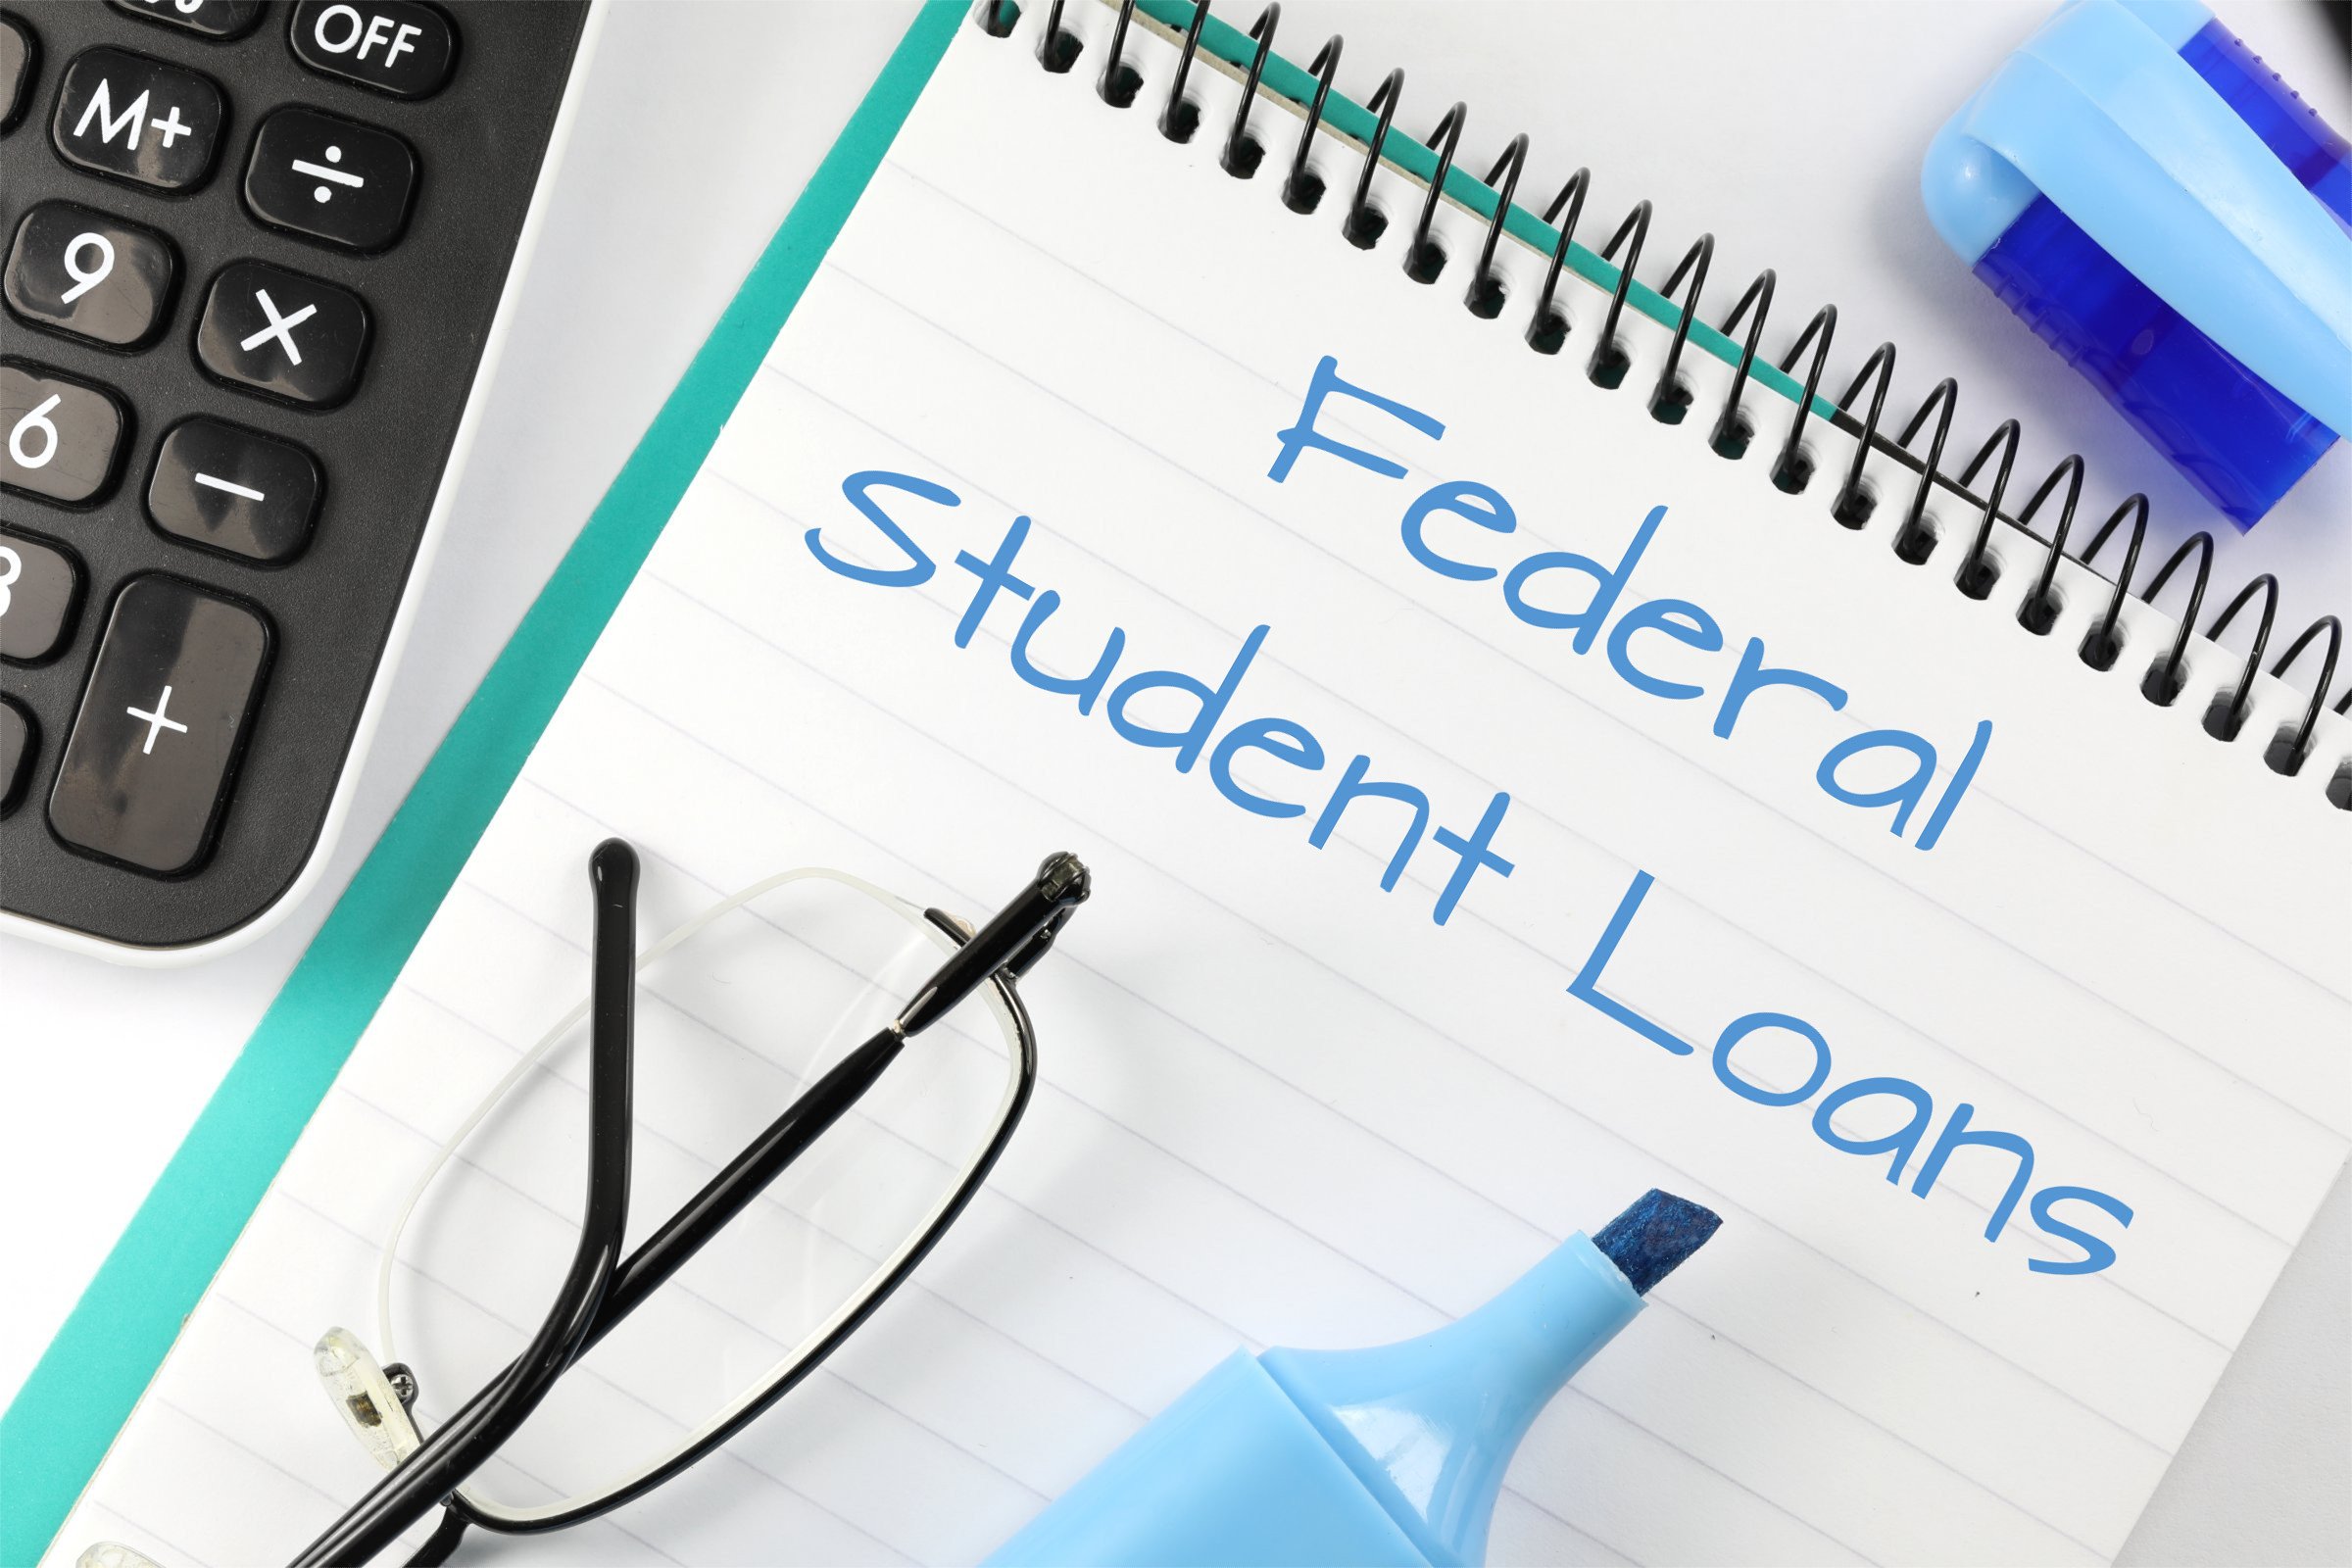 federal student loans